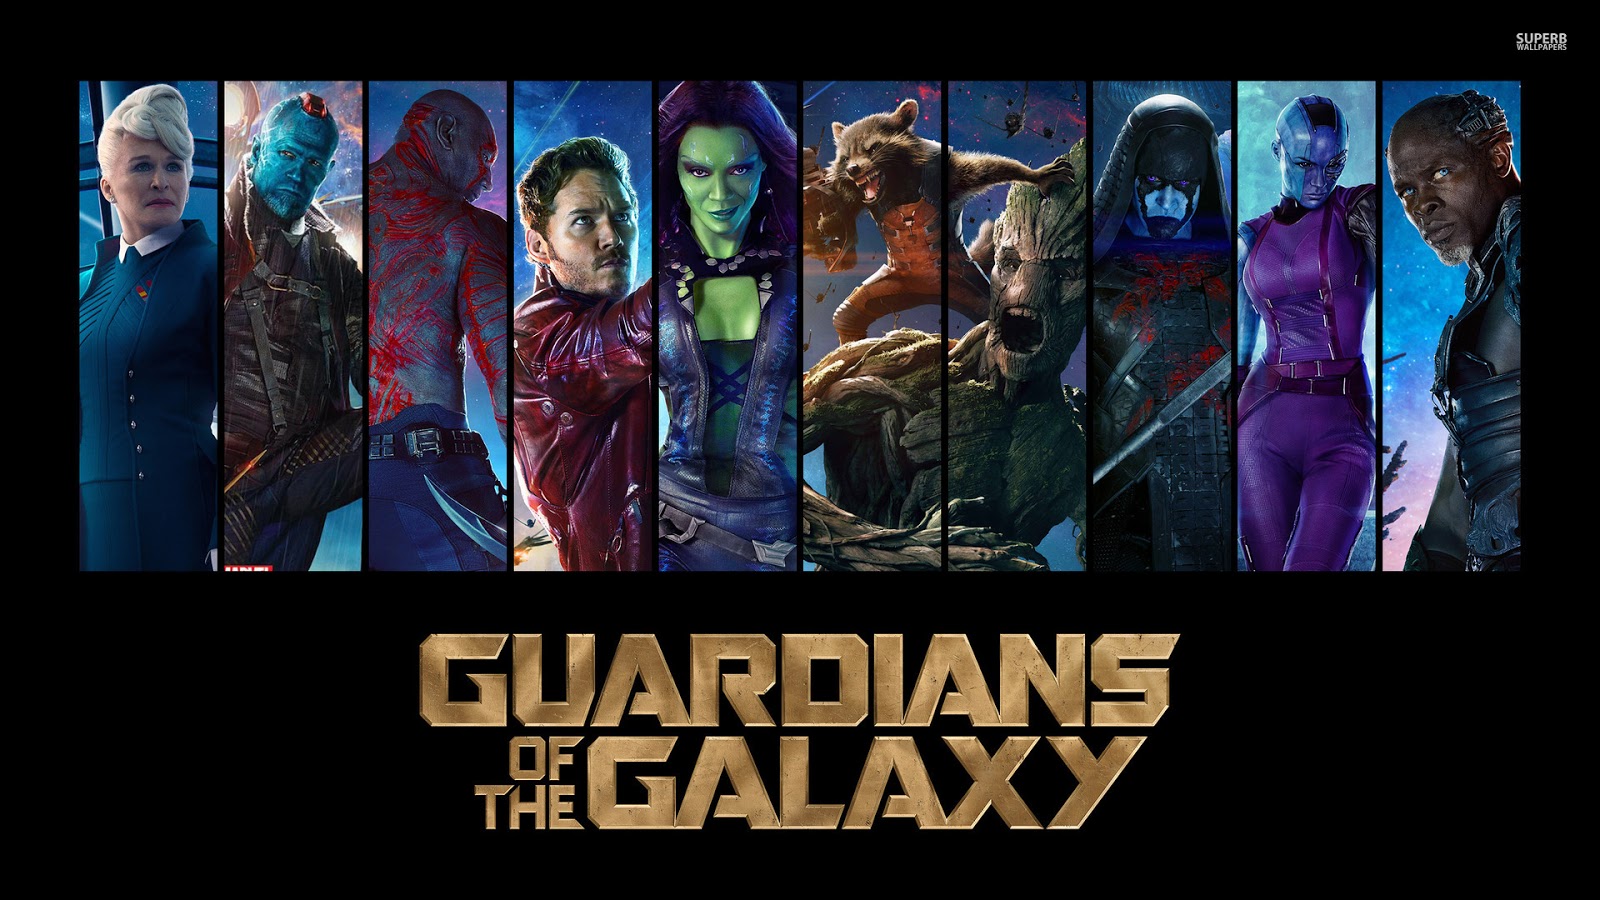 Guardians Of The Galaxy Free Printable Backgrounds Posters Or Invitations Oh My Fiesta For Geeks